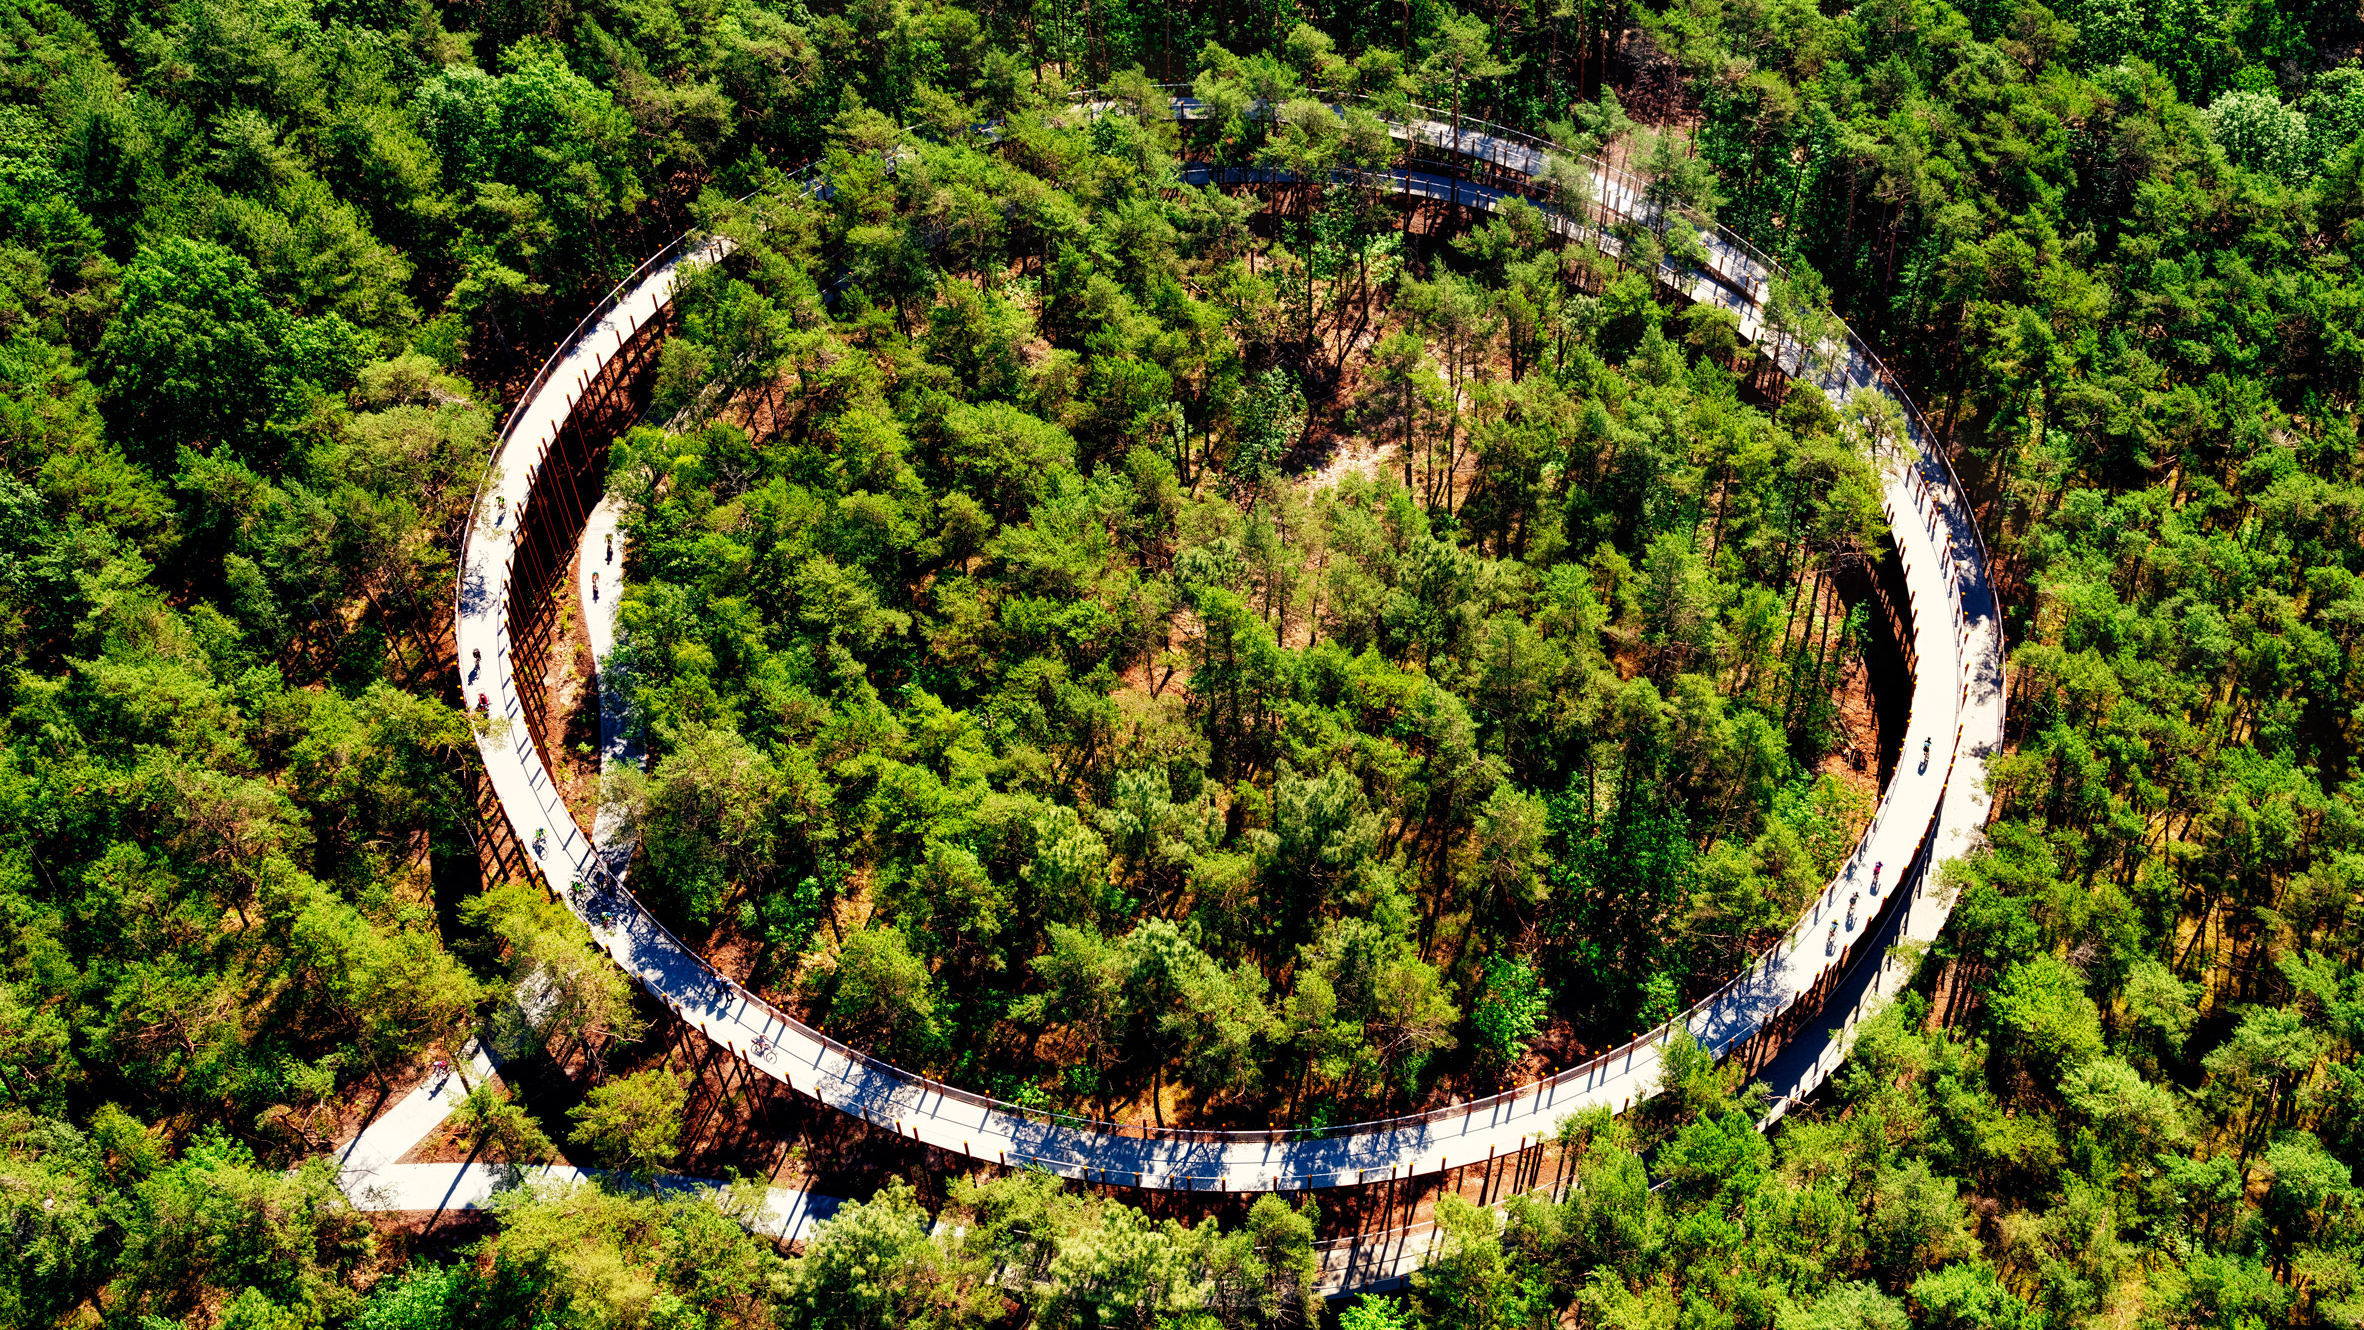 Raised circular cycling path gives views of forest